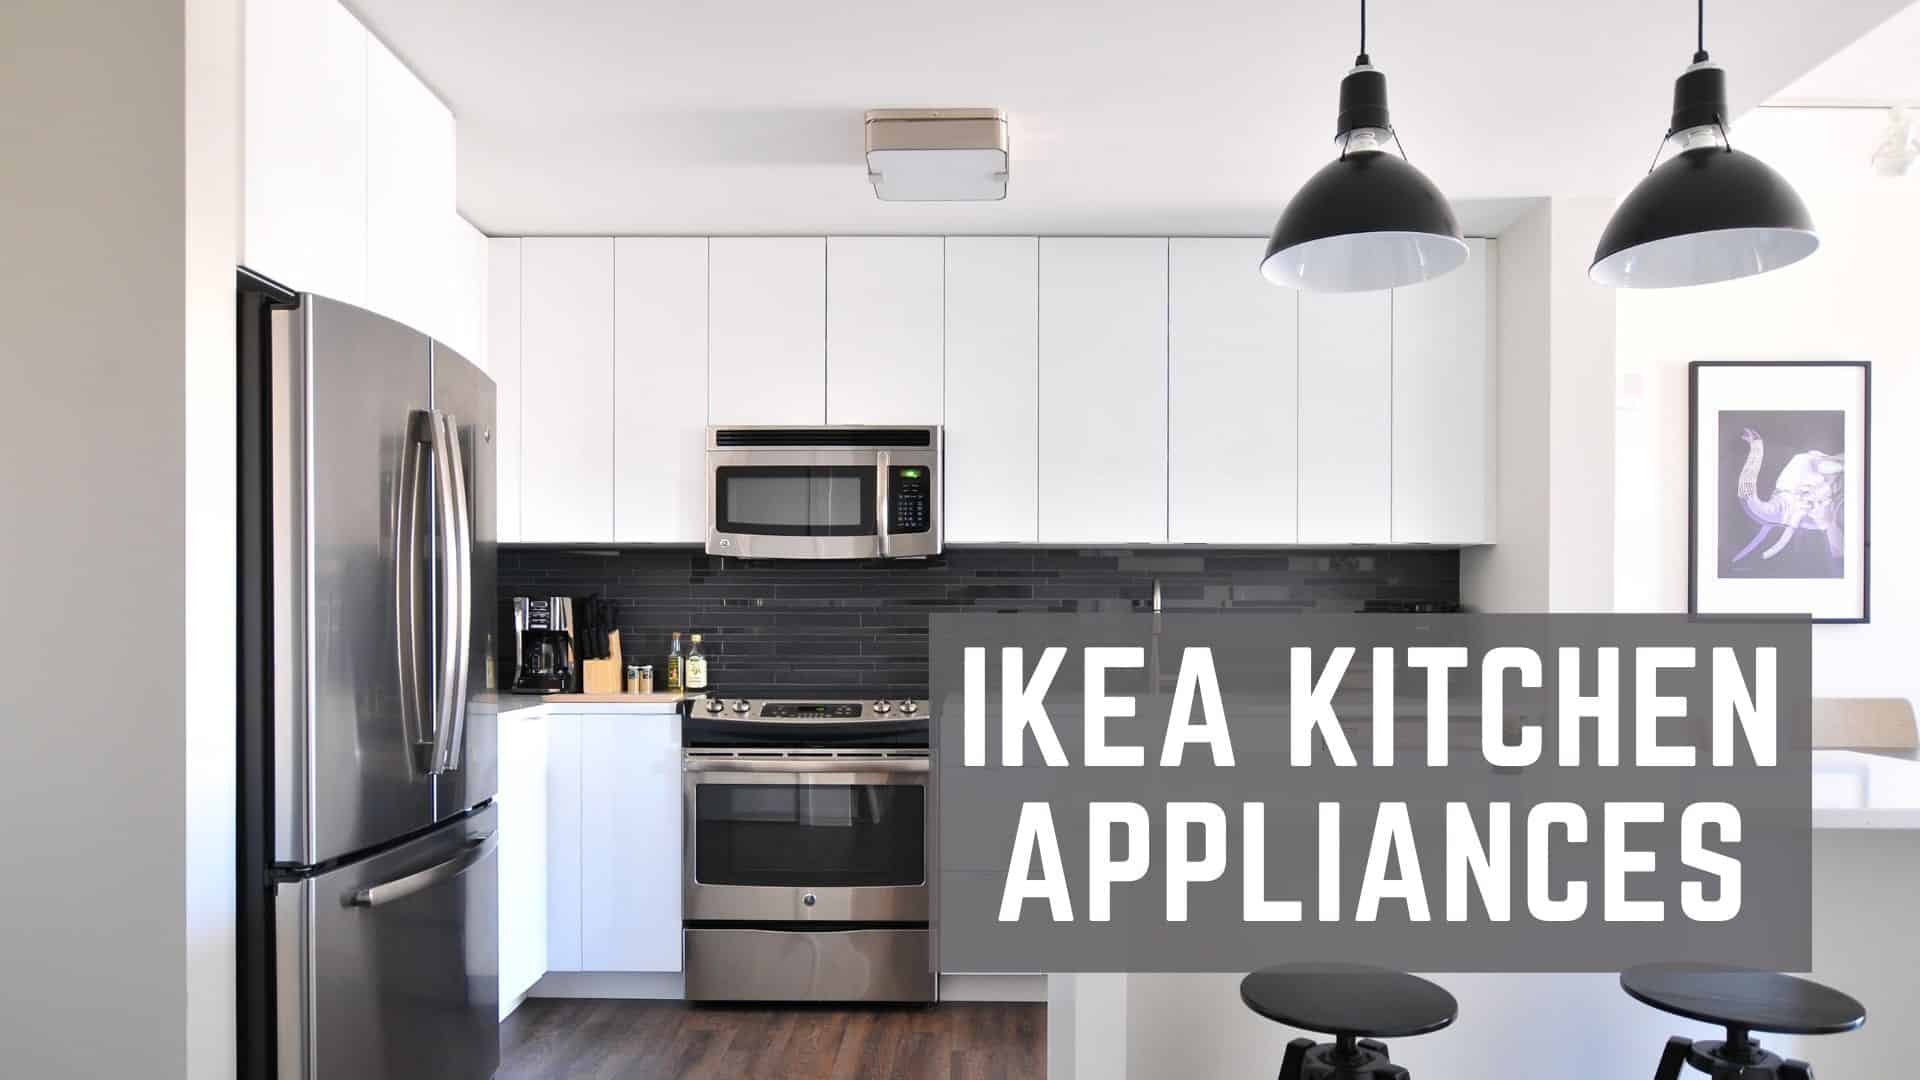 Why you should NOT buy IKEA kitchen appliances? - THE HOMESTUD